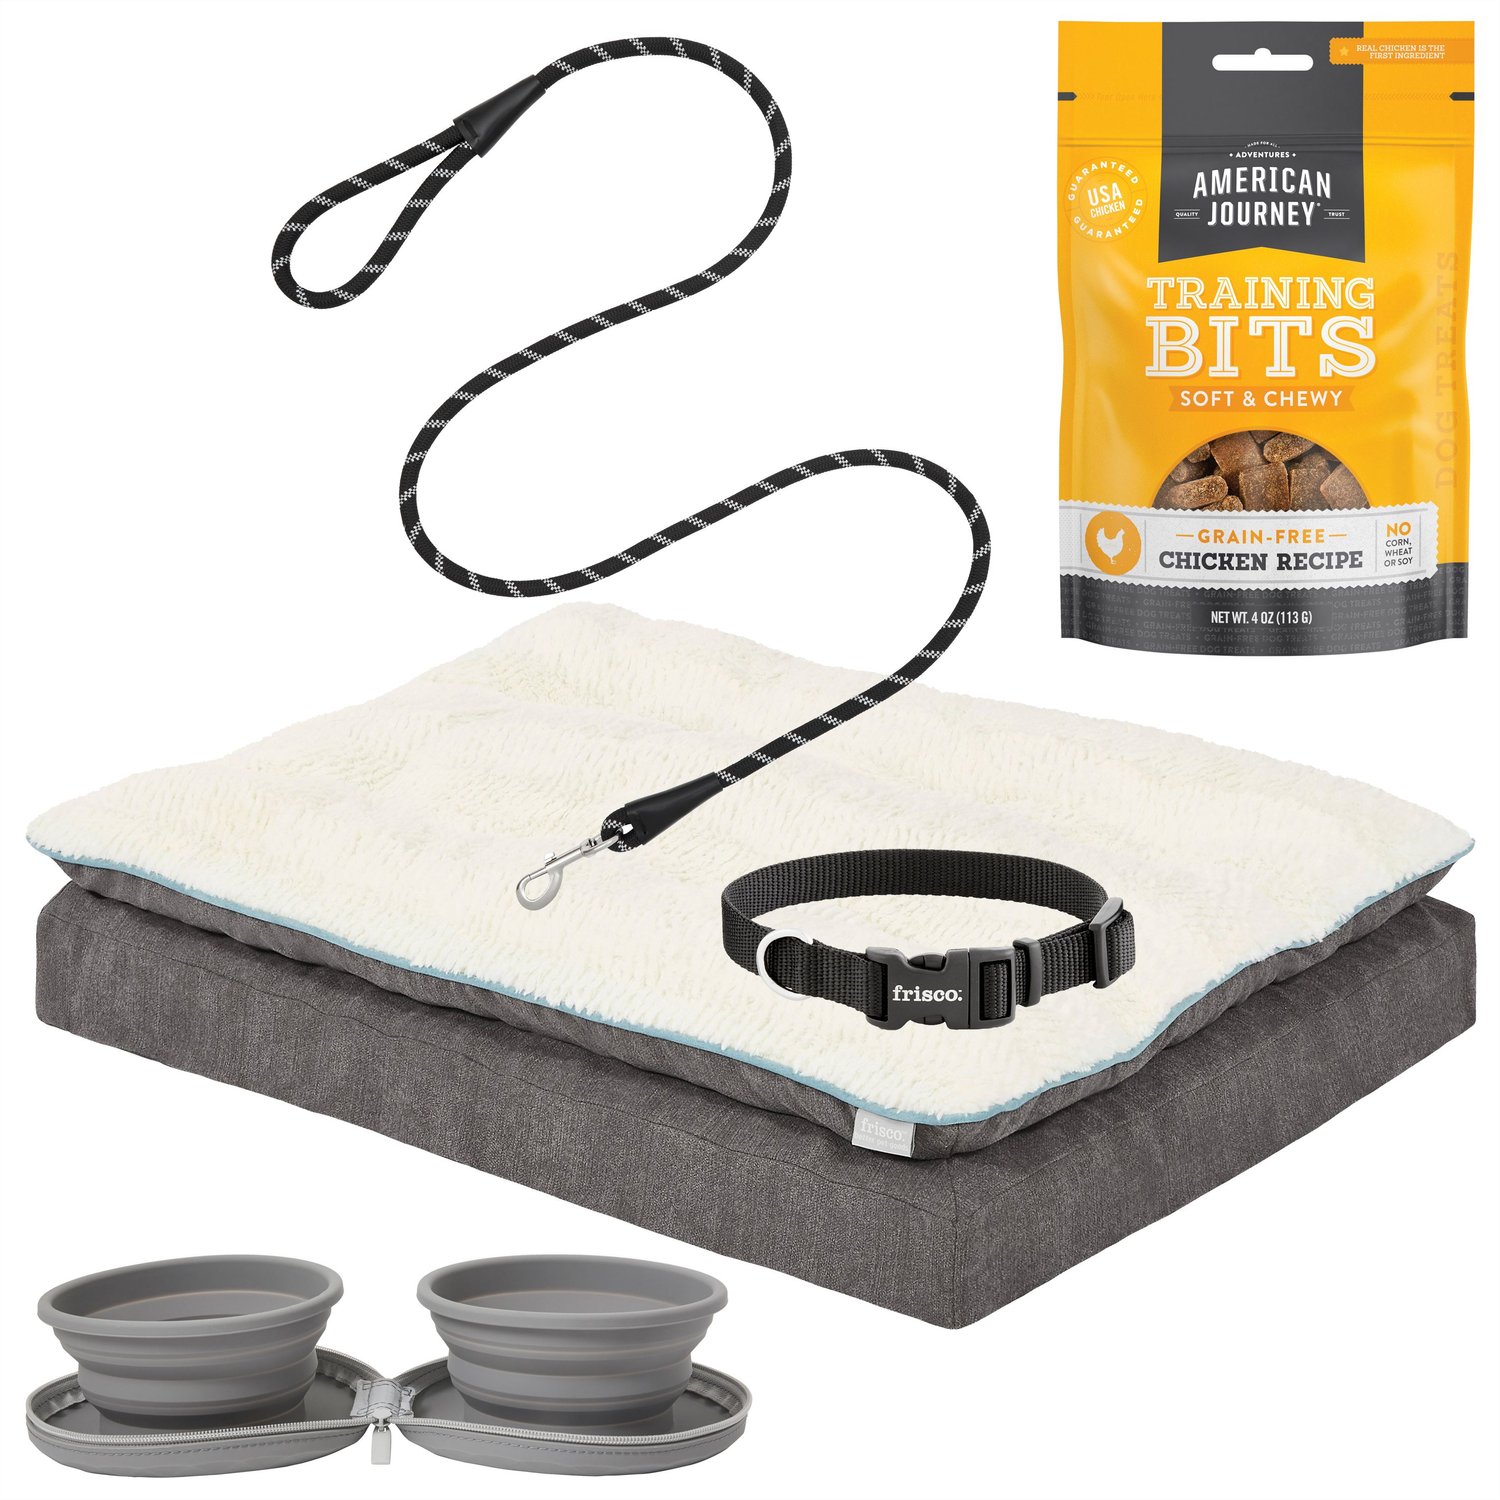 Bundle: Starter Kit - Frisco Plush Orthopedic Pillowtop Dog Bed w/Removable Cover, Gray, Large + 4 other items